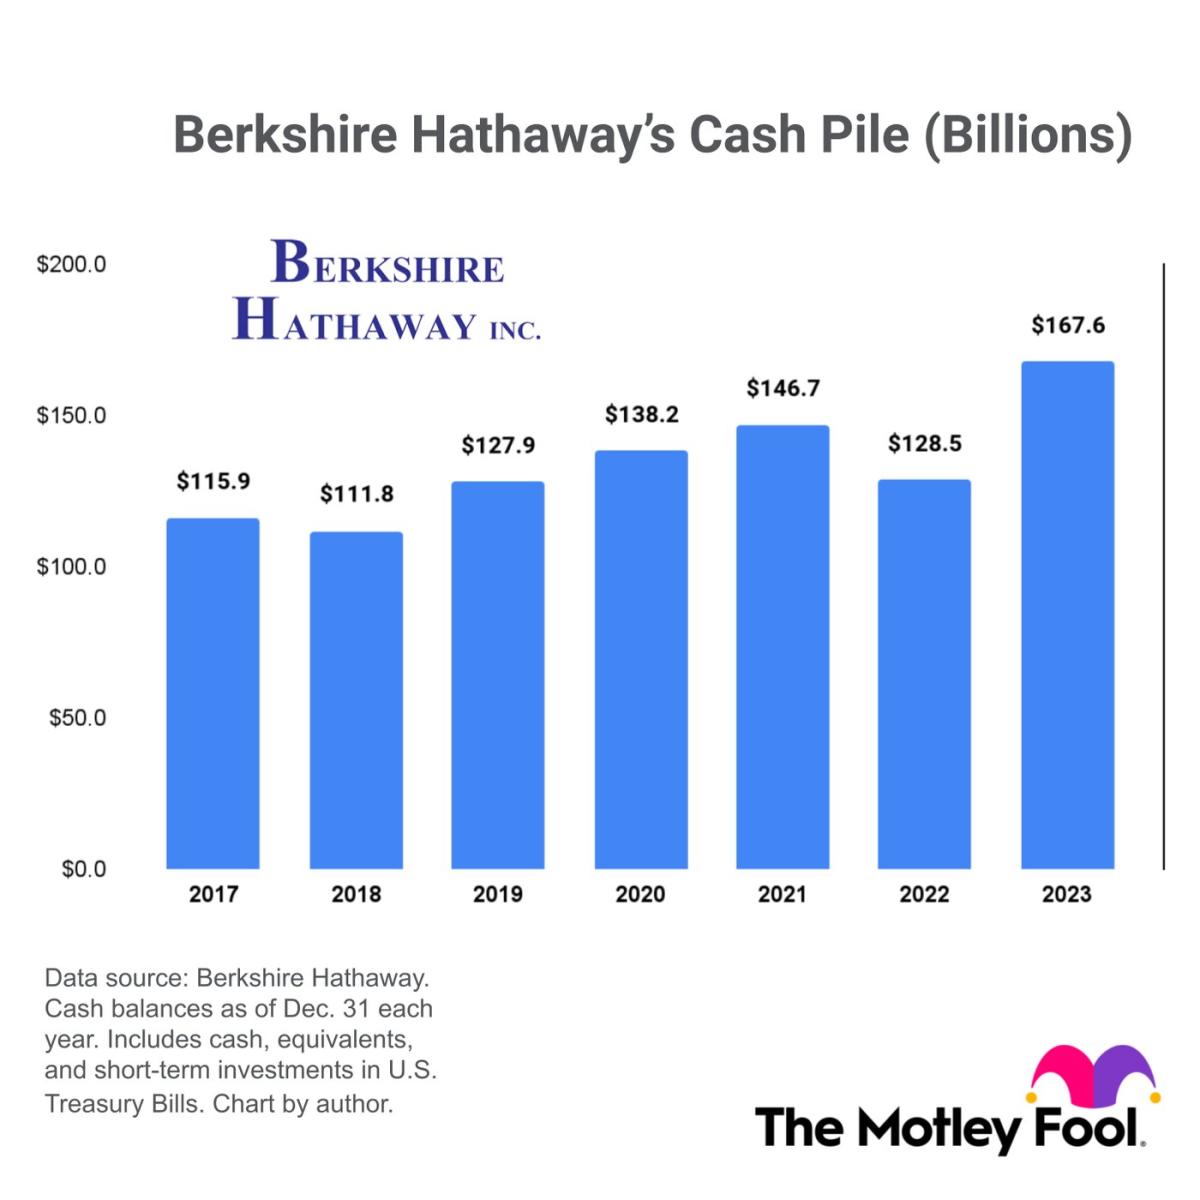 Warren Buffett Is Sitting on a Record $167.6 Billion Cash Pile. Here are 10 Stocks Berkshire Hathaway Could Buy Outright.